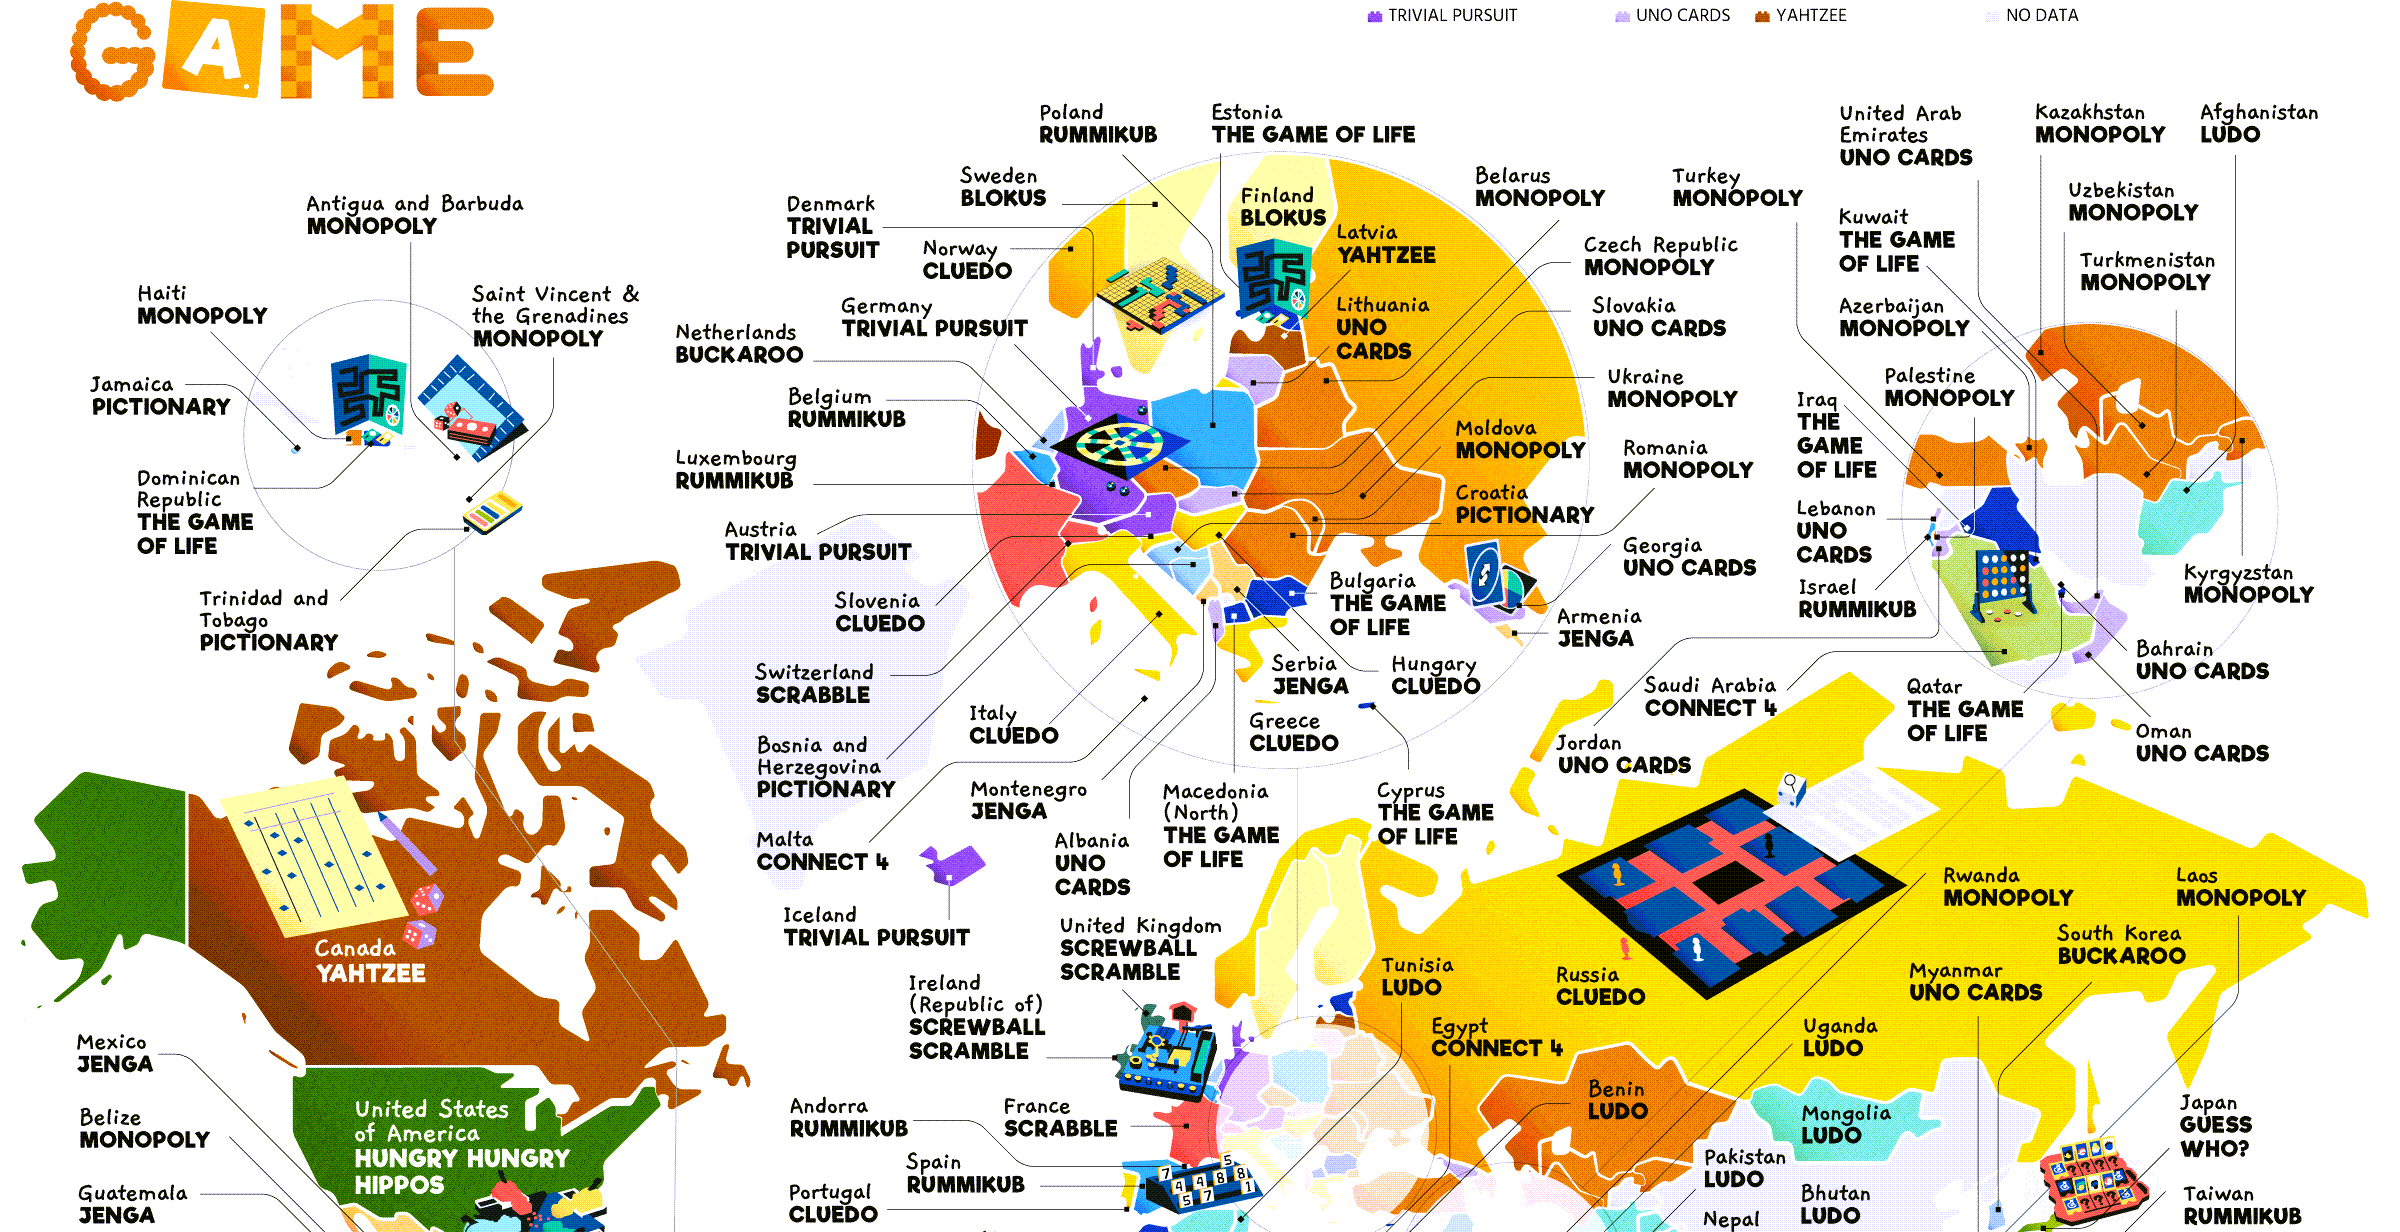 Every country's favorite toys, consoles, and board games mapped